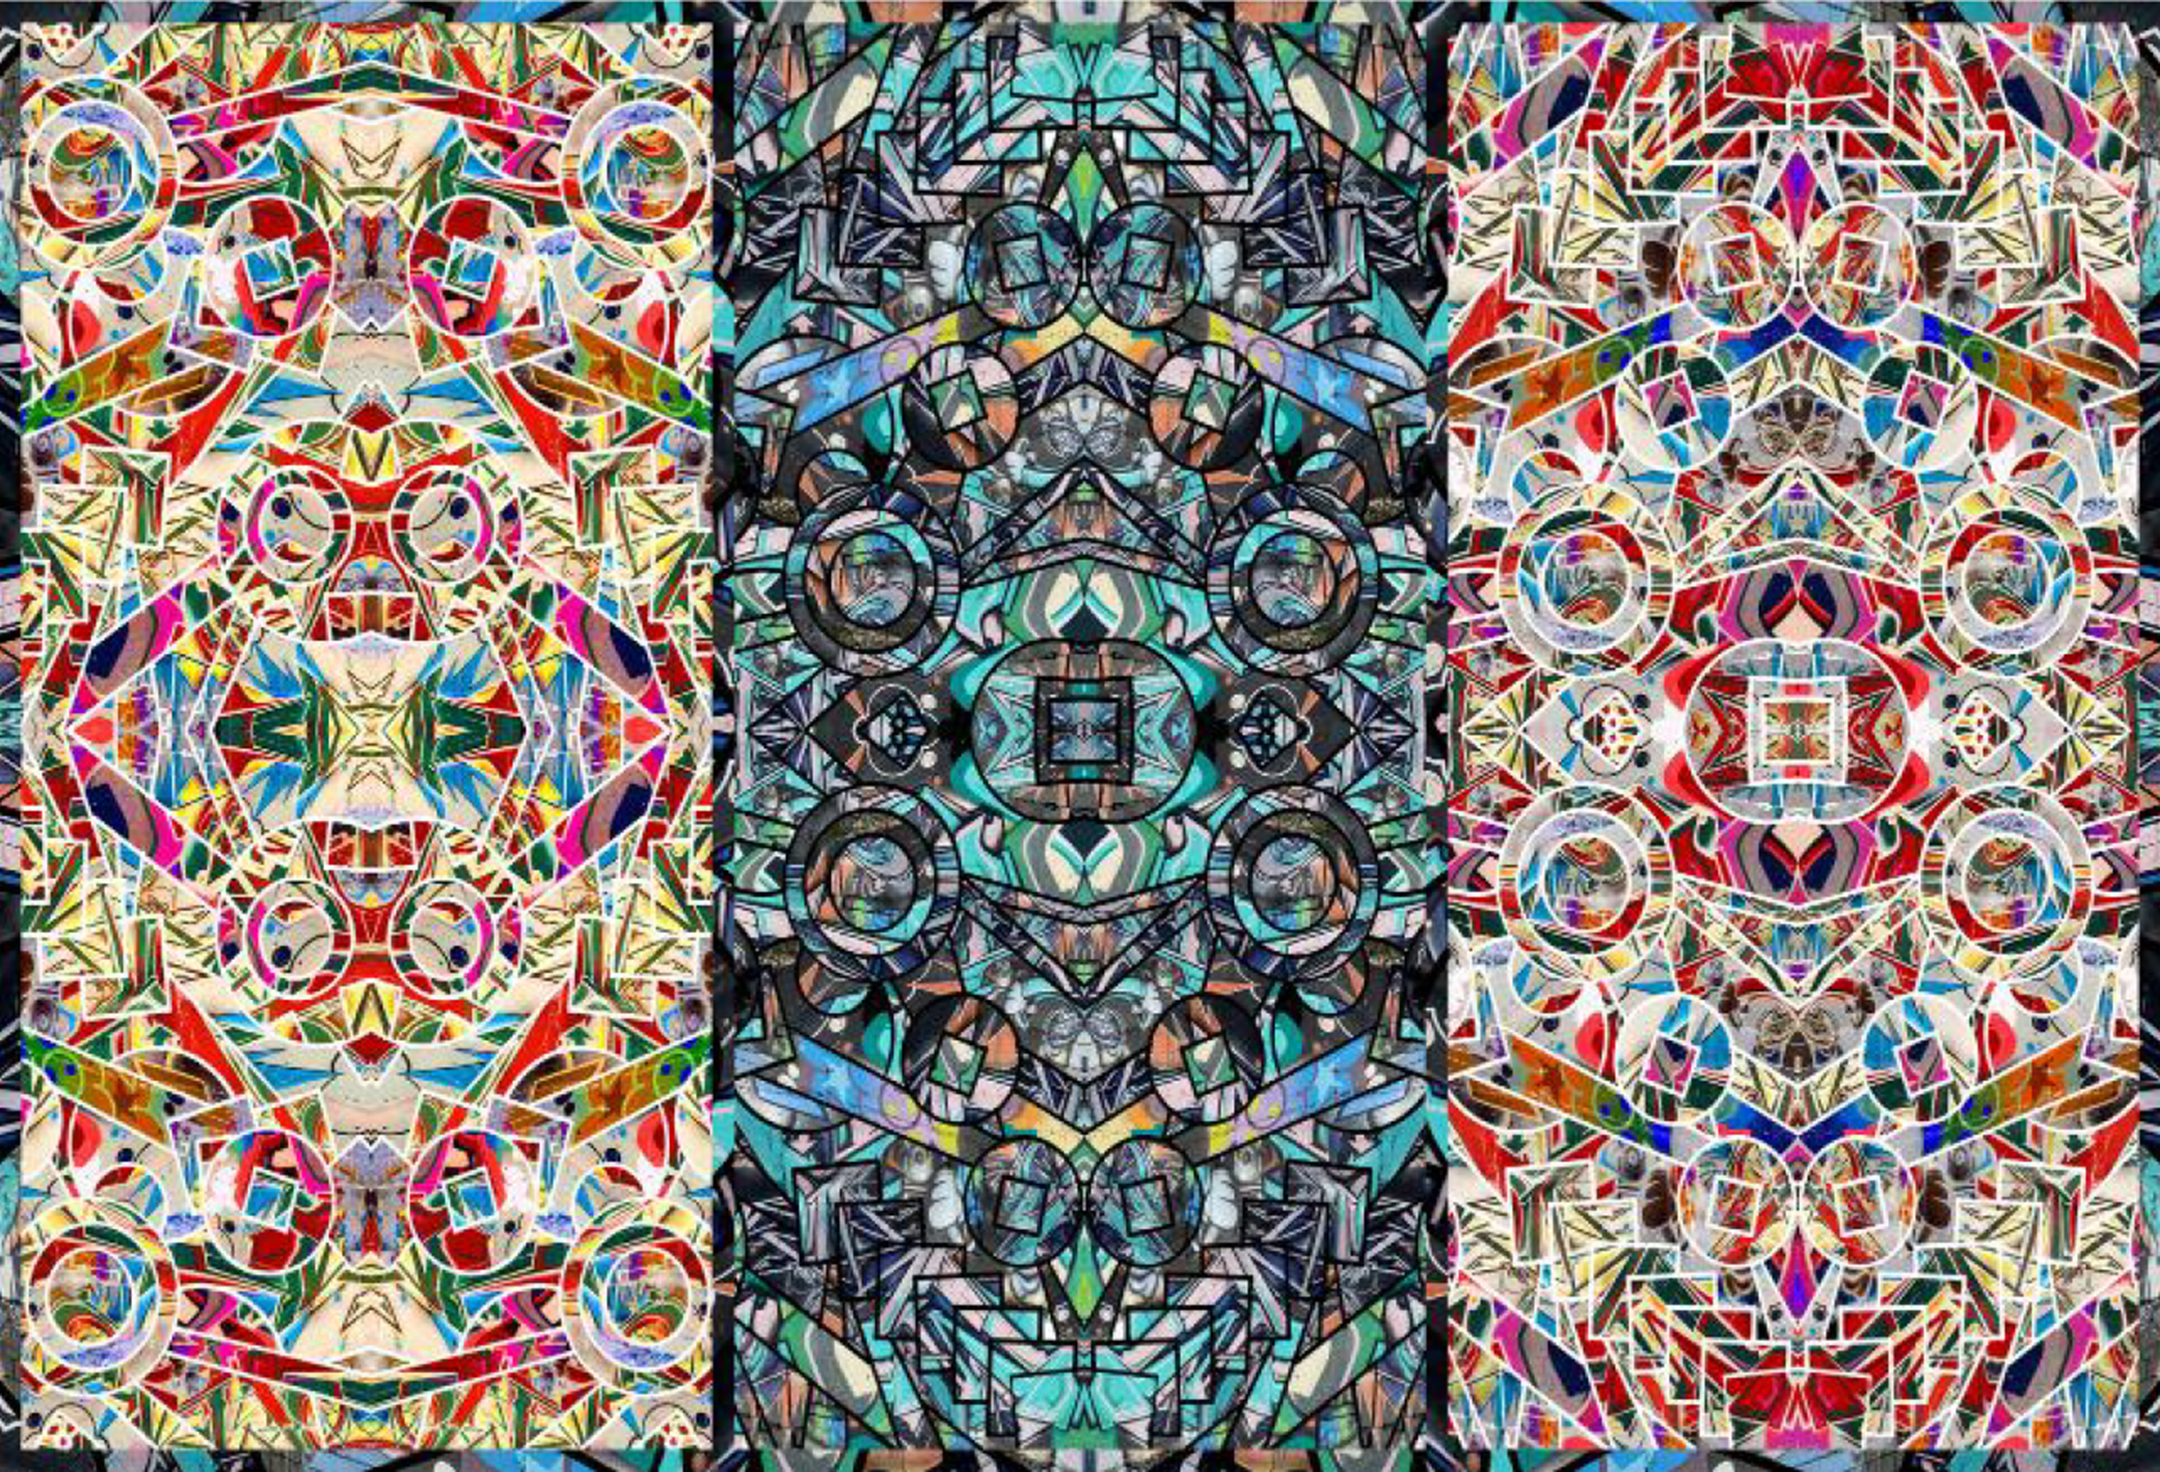 Three rectangles of kaleidoscopic graffiti imagery done in the style of stained glass